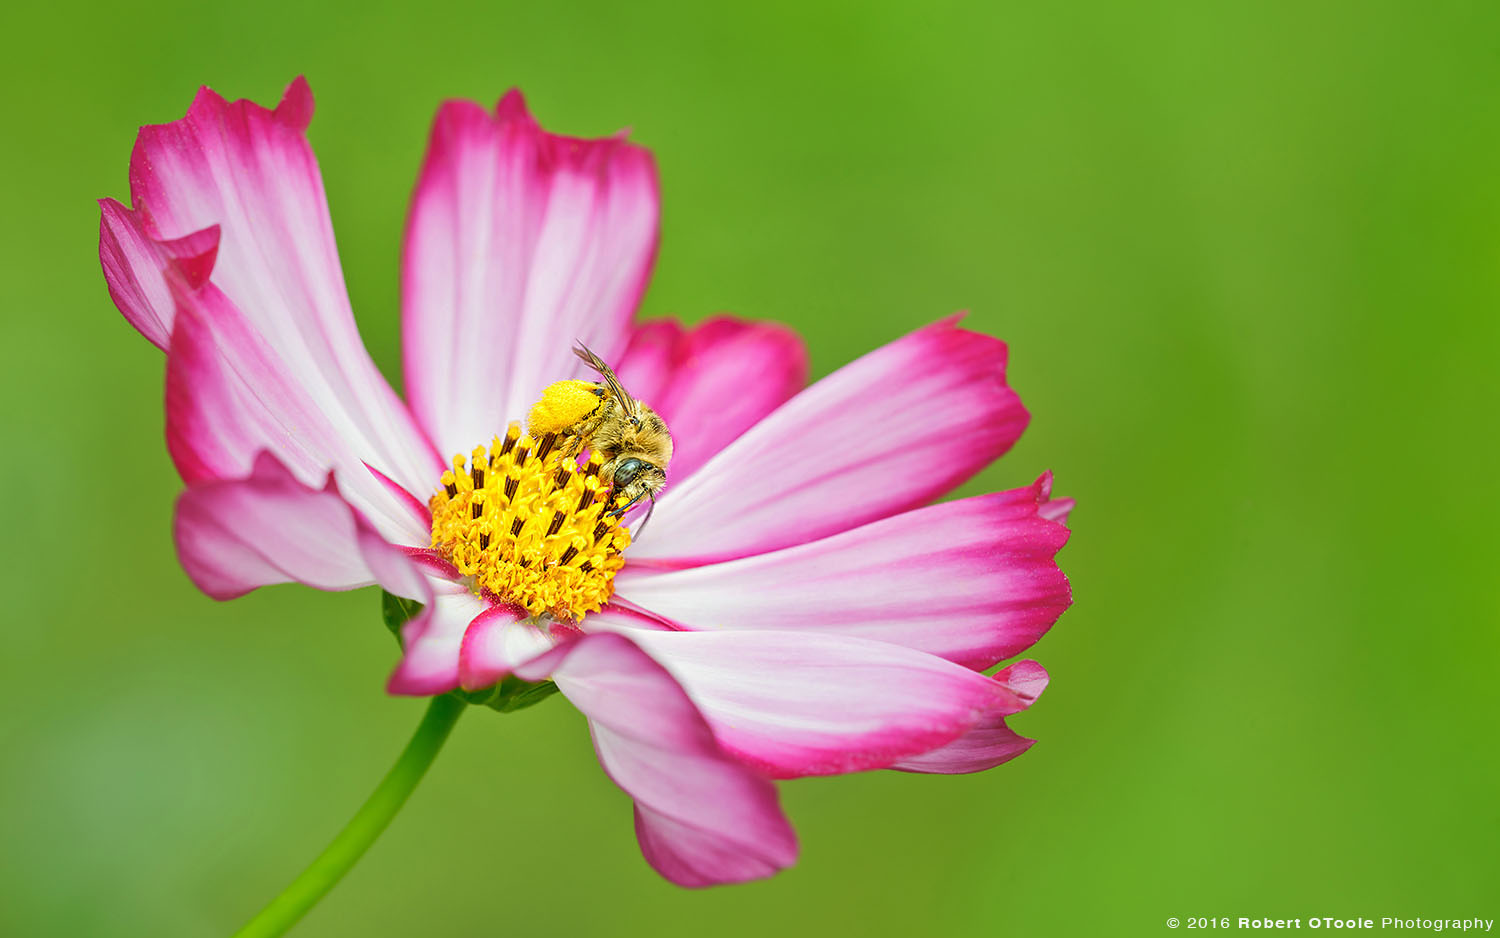 Native Bee on Bicolor Pink Cosmos Flower 